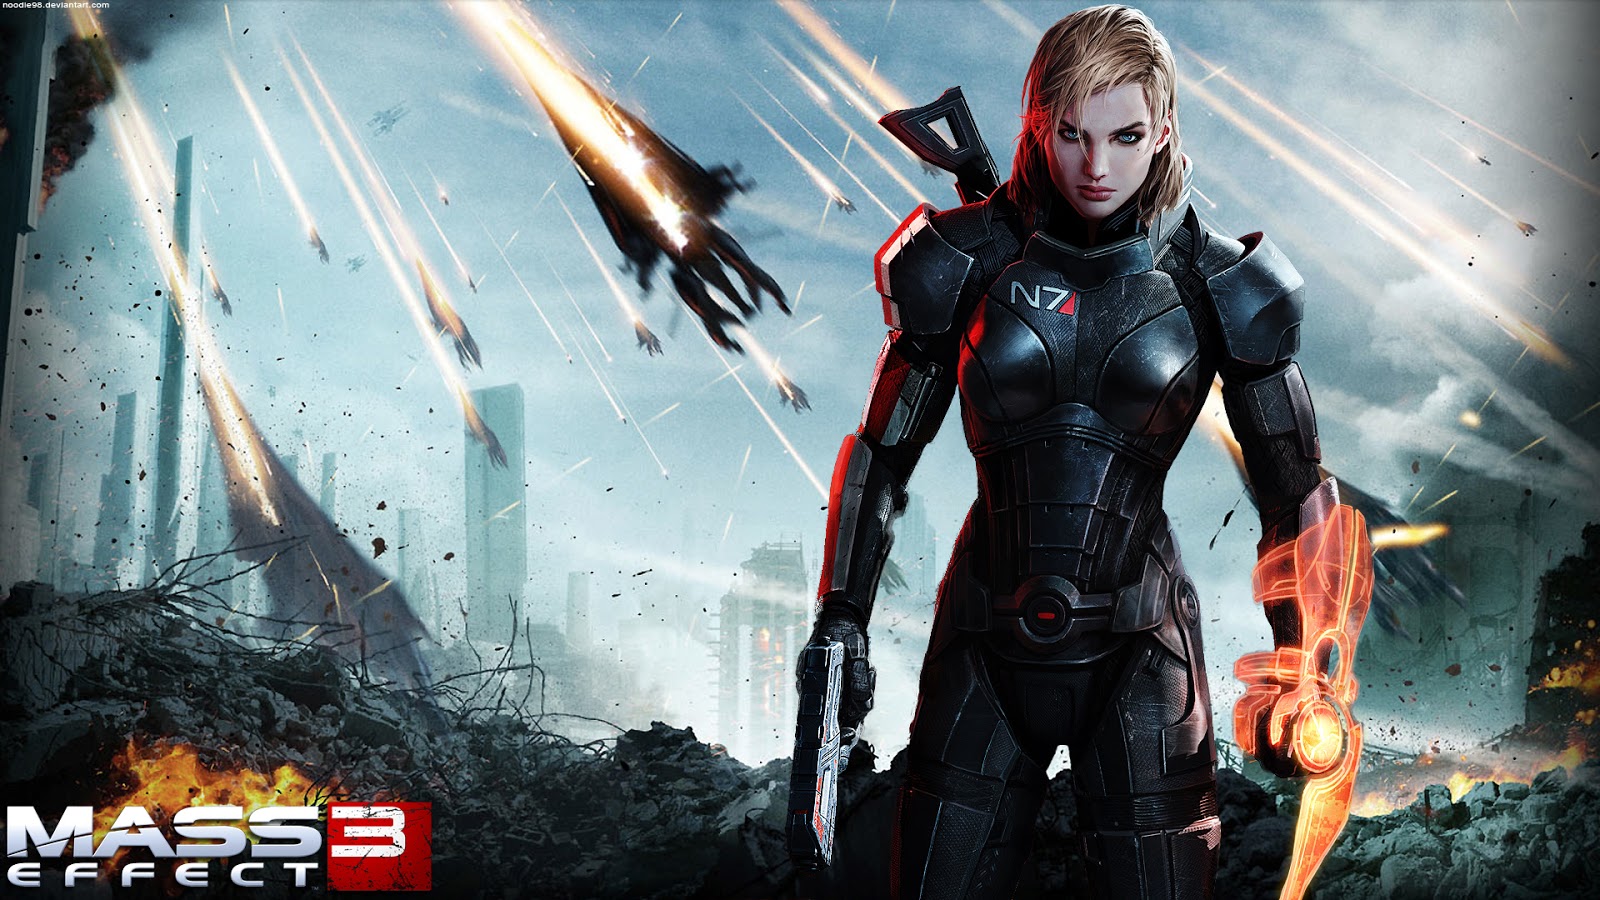 Disabled Heroes and Heroines in Mass Effect. Video Games as Literature: Essays